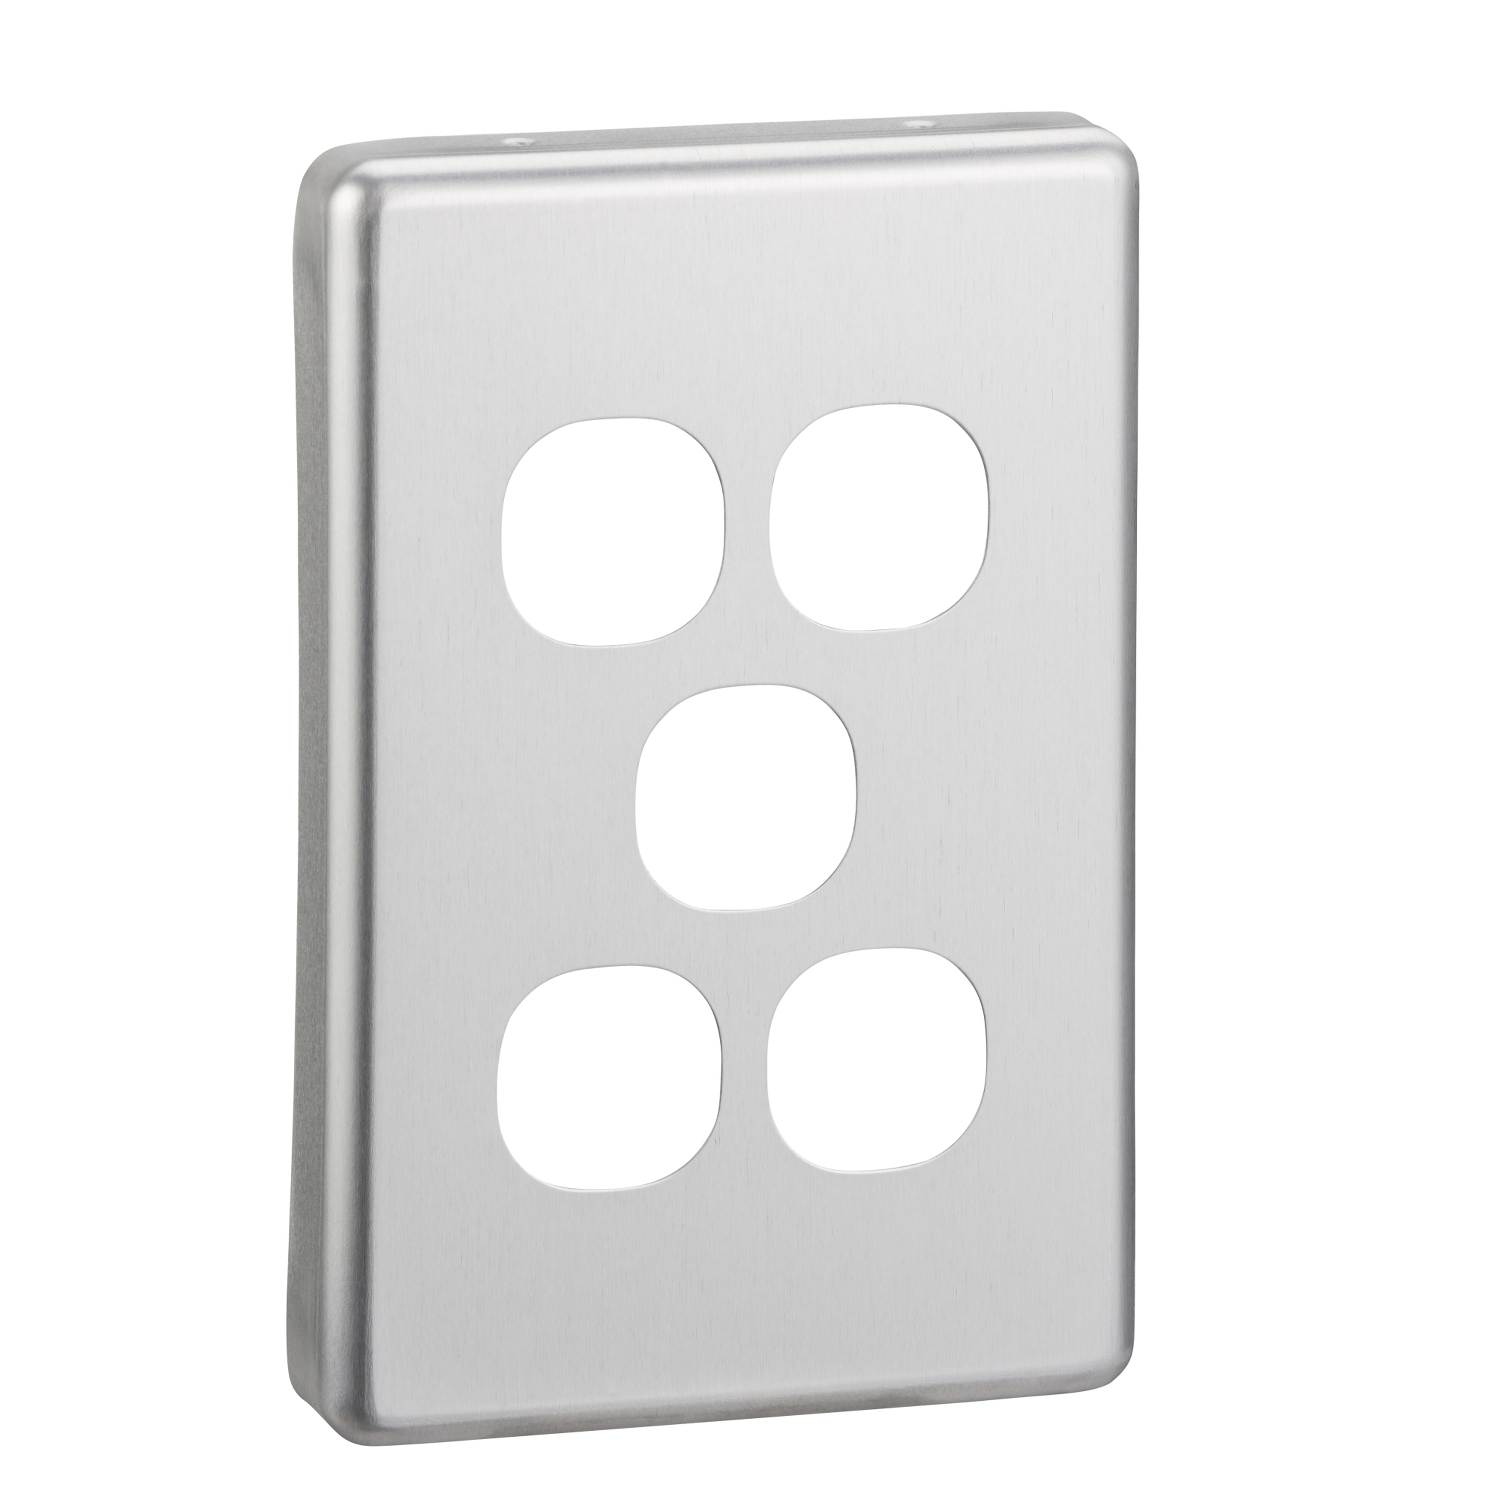 Switch Plate Covers, Metal Finishes Switch Cover, 5 Gang